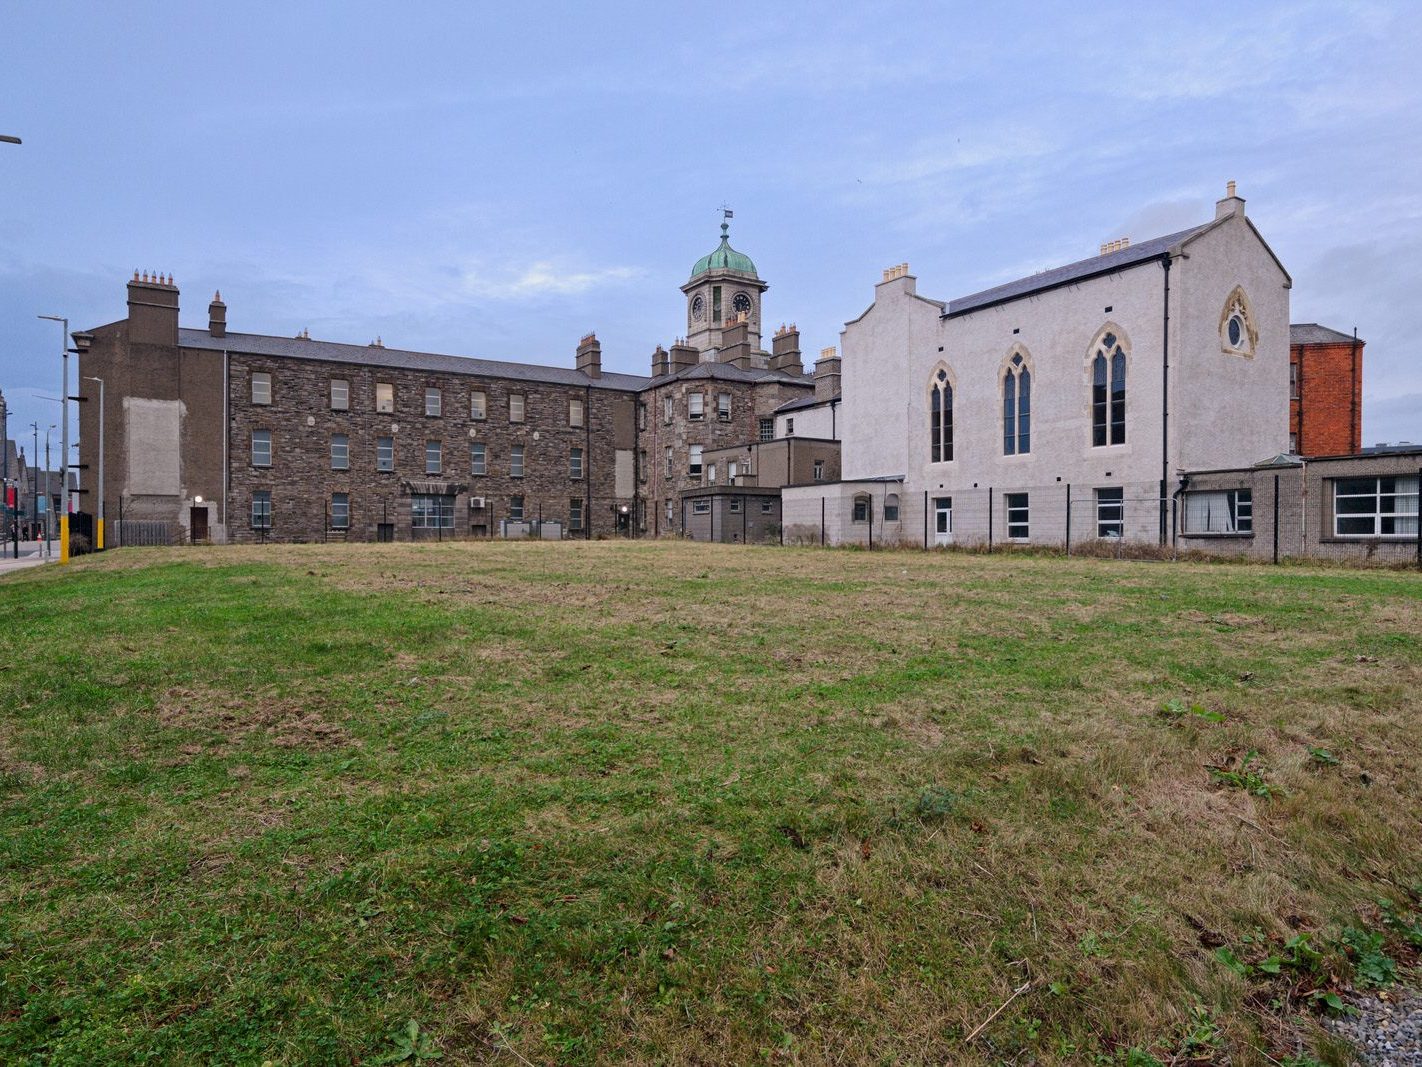 I VISITED THE GRANGEGORMAN UNIVERSITY CAMPUS [THERE WAS NO SIGN OF CHRISTMAS CELEBRATIONS THERE]-226035-1